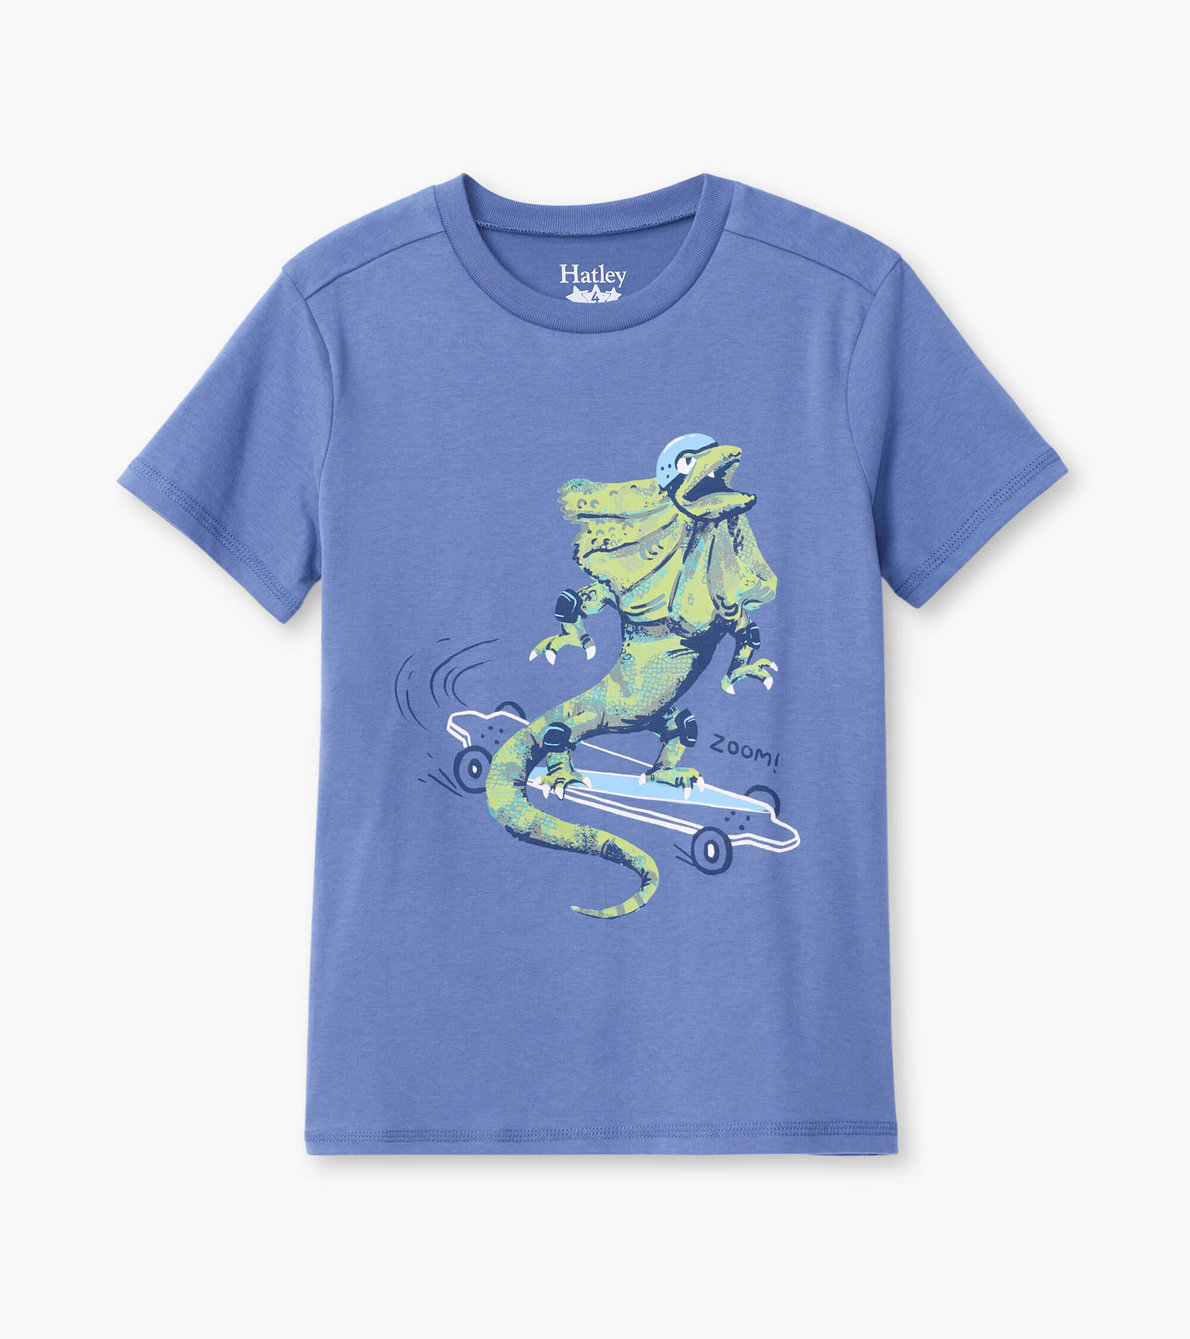 View larger image of Skateboard Lizard Graphic Tee